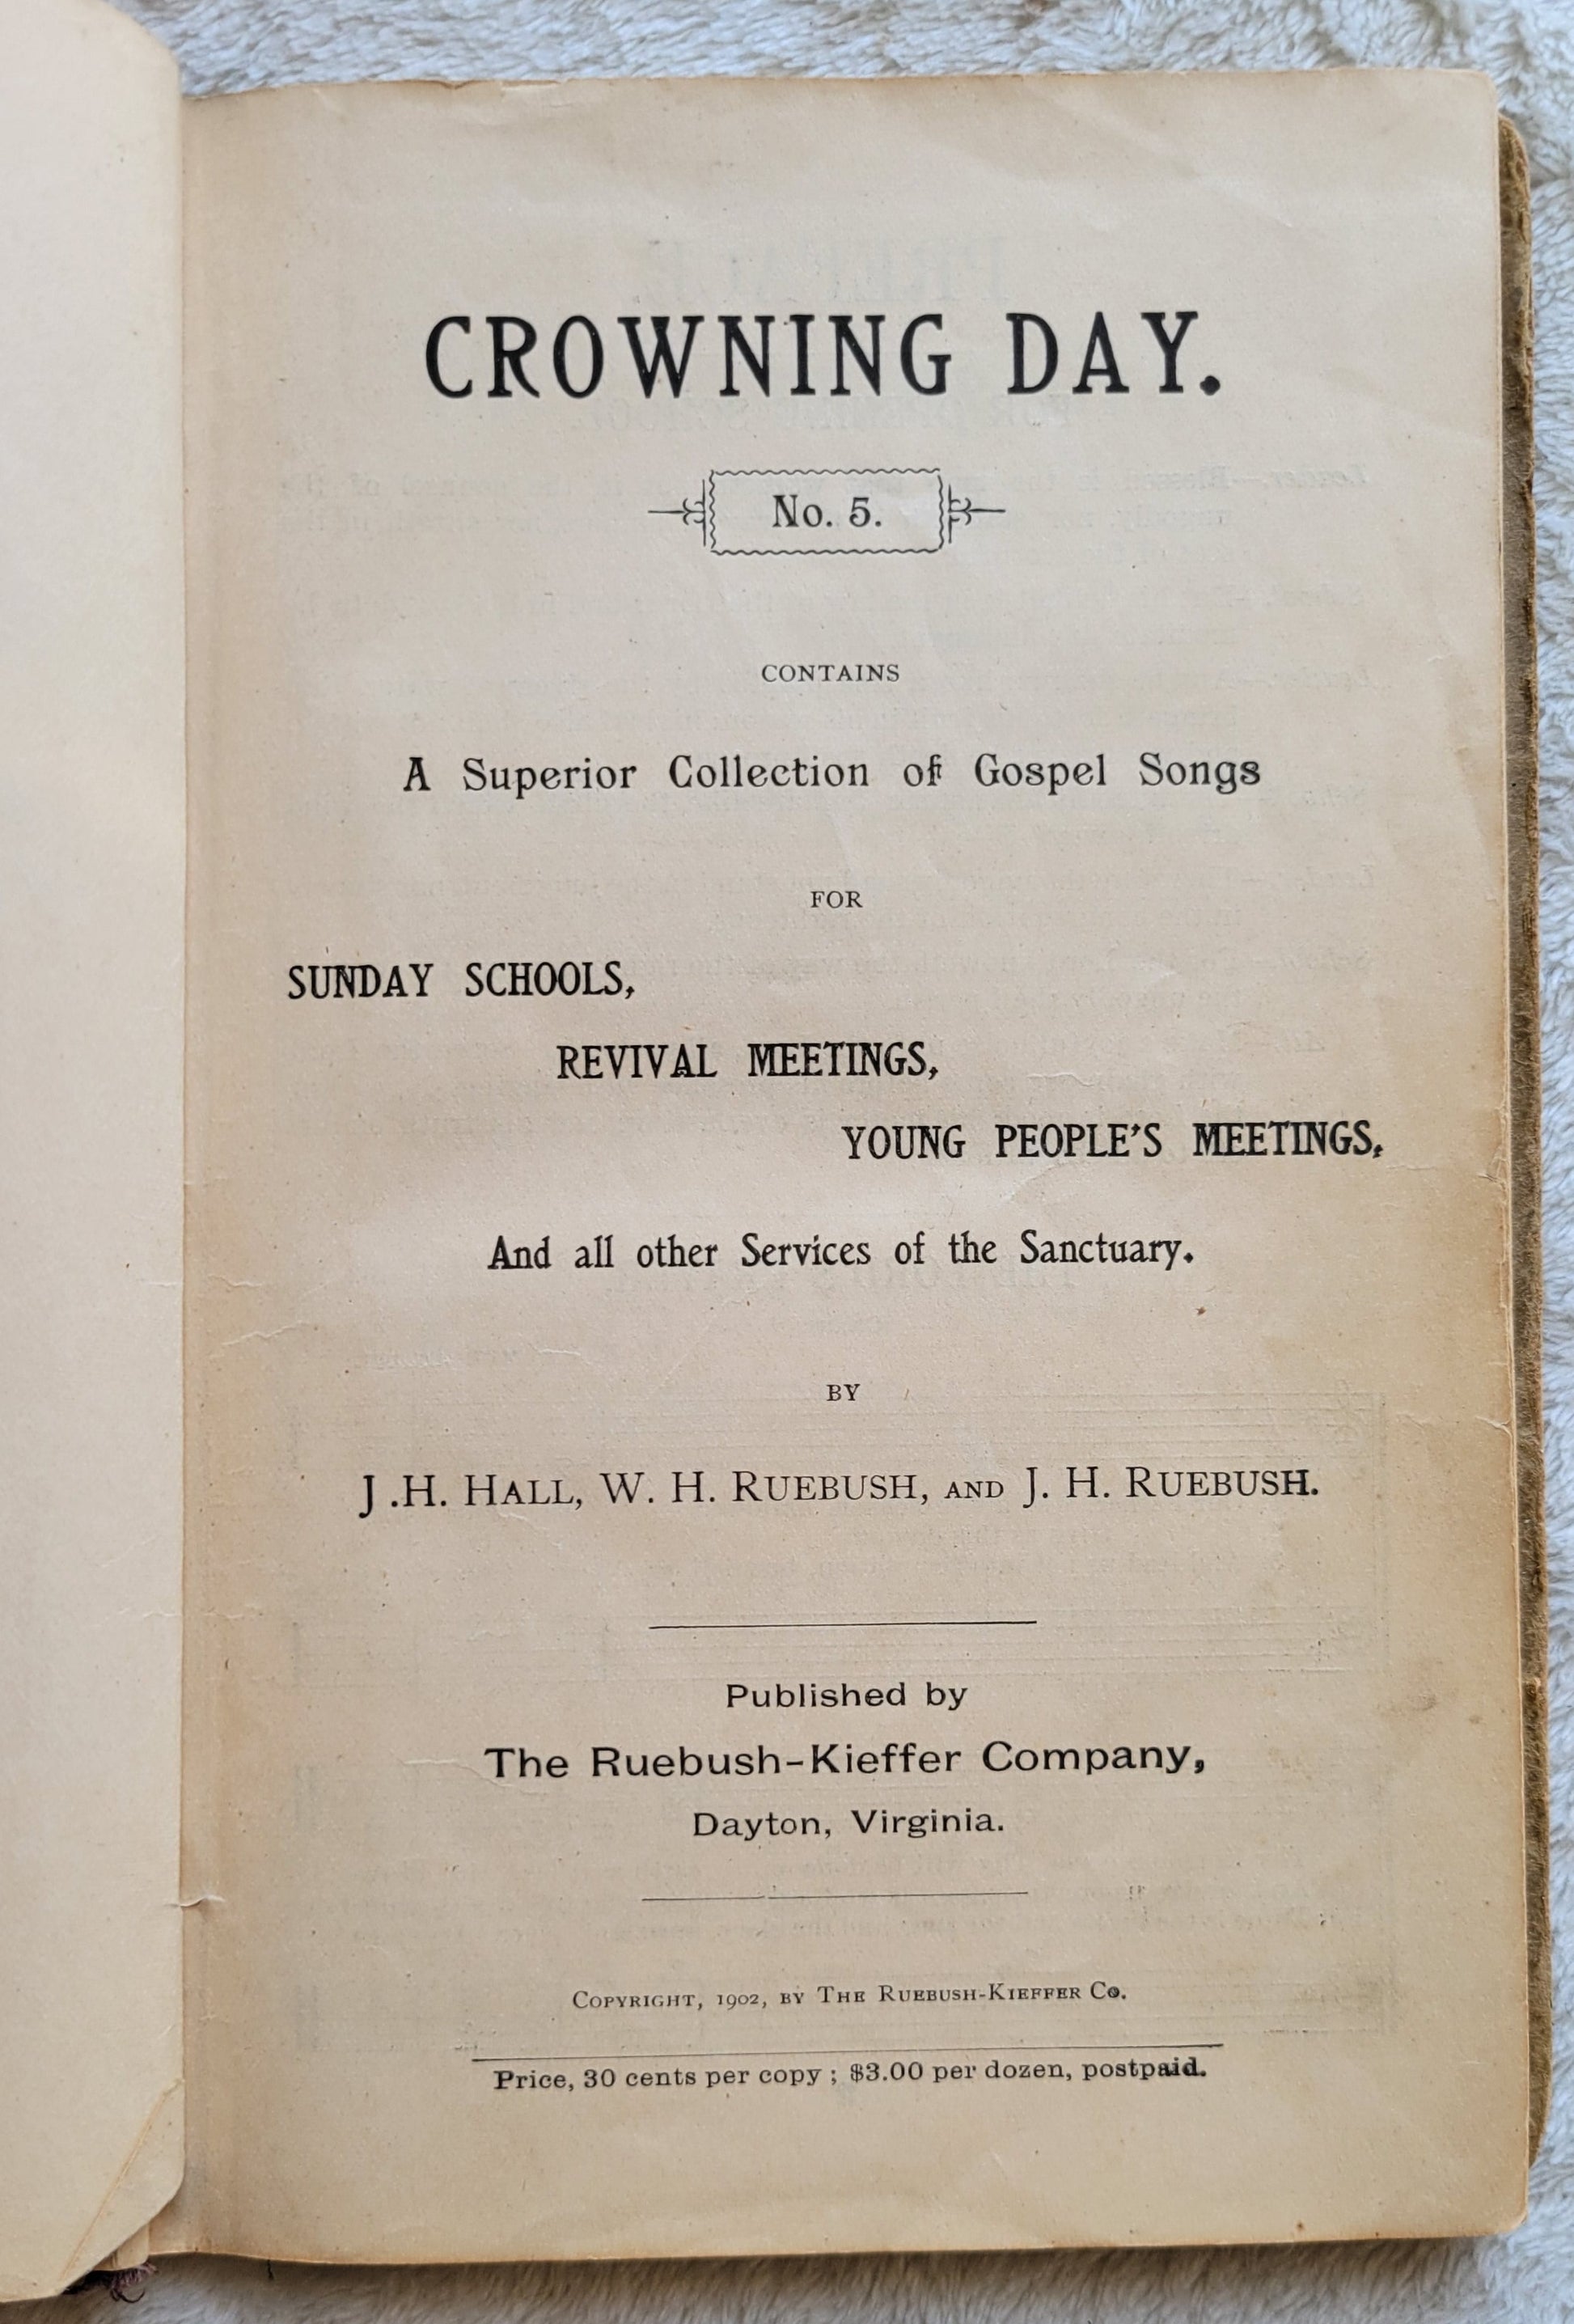 Antique book Crowning Day No. 5 is a Christian hymn book, copyrighted in 1902 by J. H. Hall, W. H. Ruebush, and J. H. Ruebush and published by the Ruebush-Kieffer Company, Dayton, Virginia.  View of inside title page.